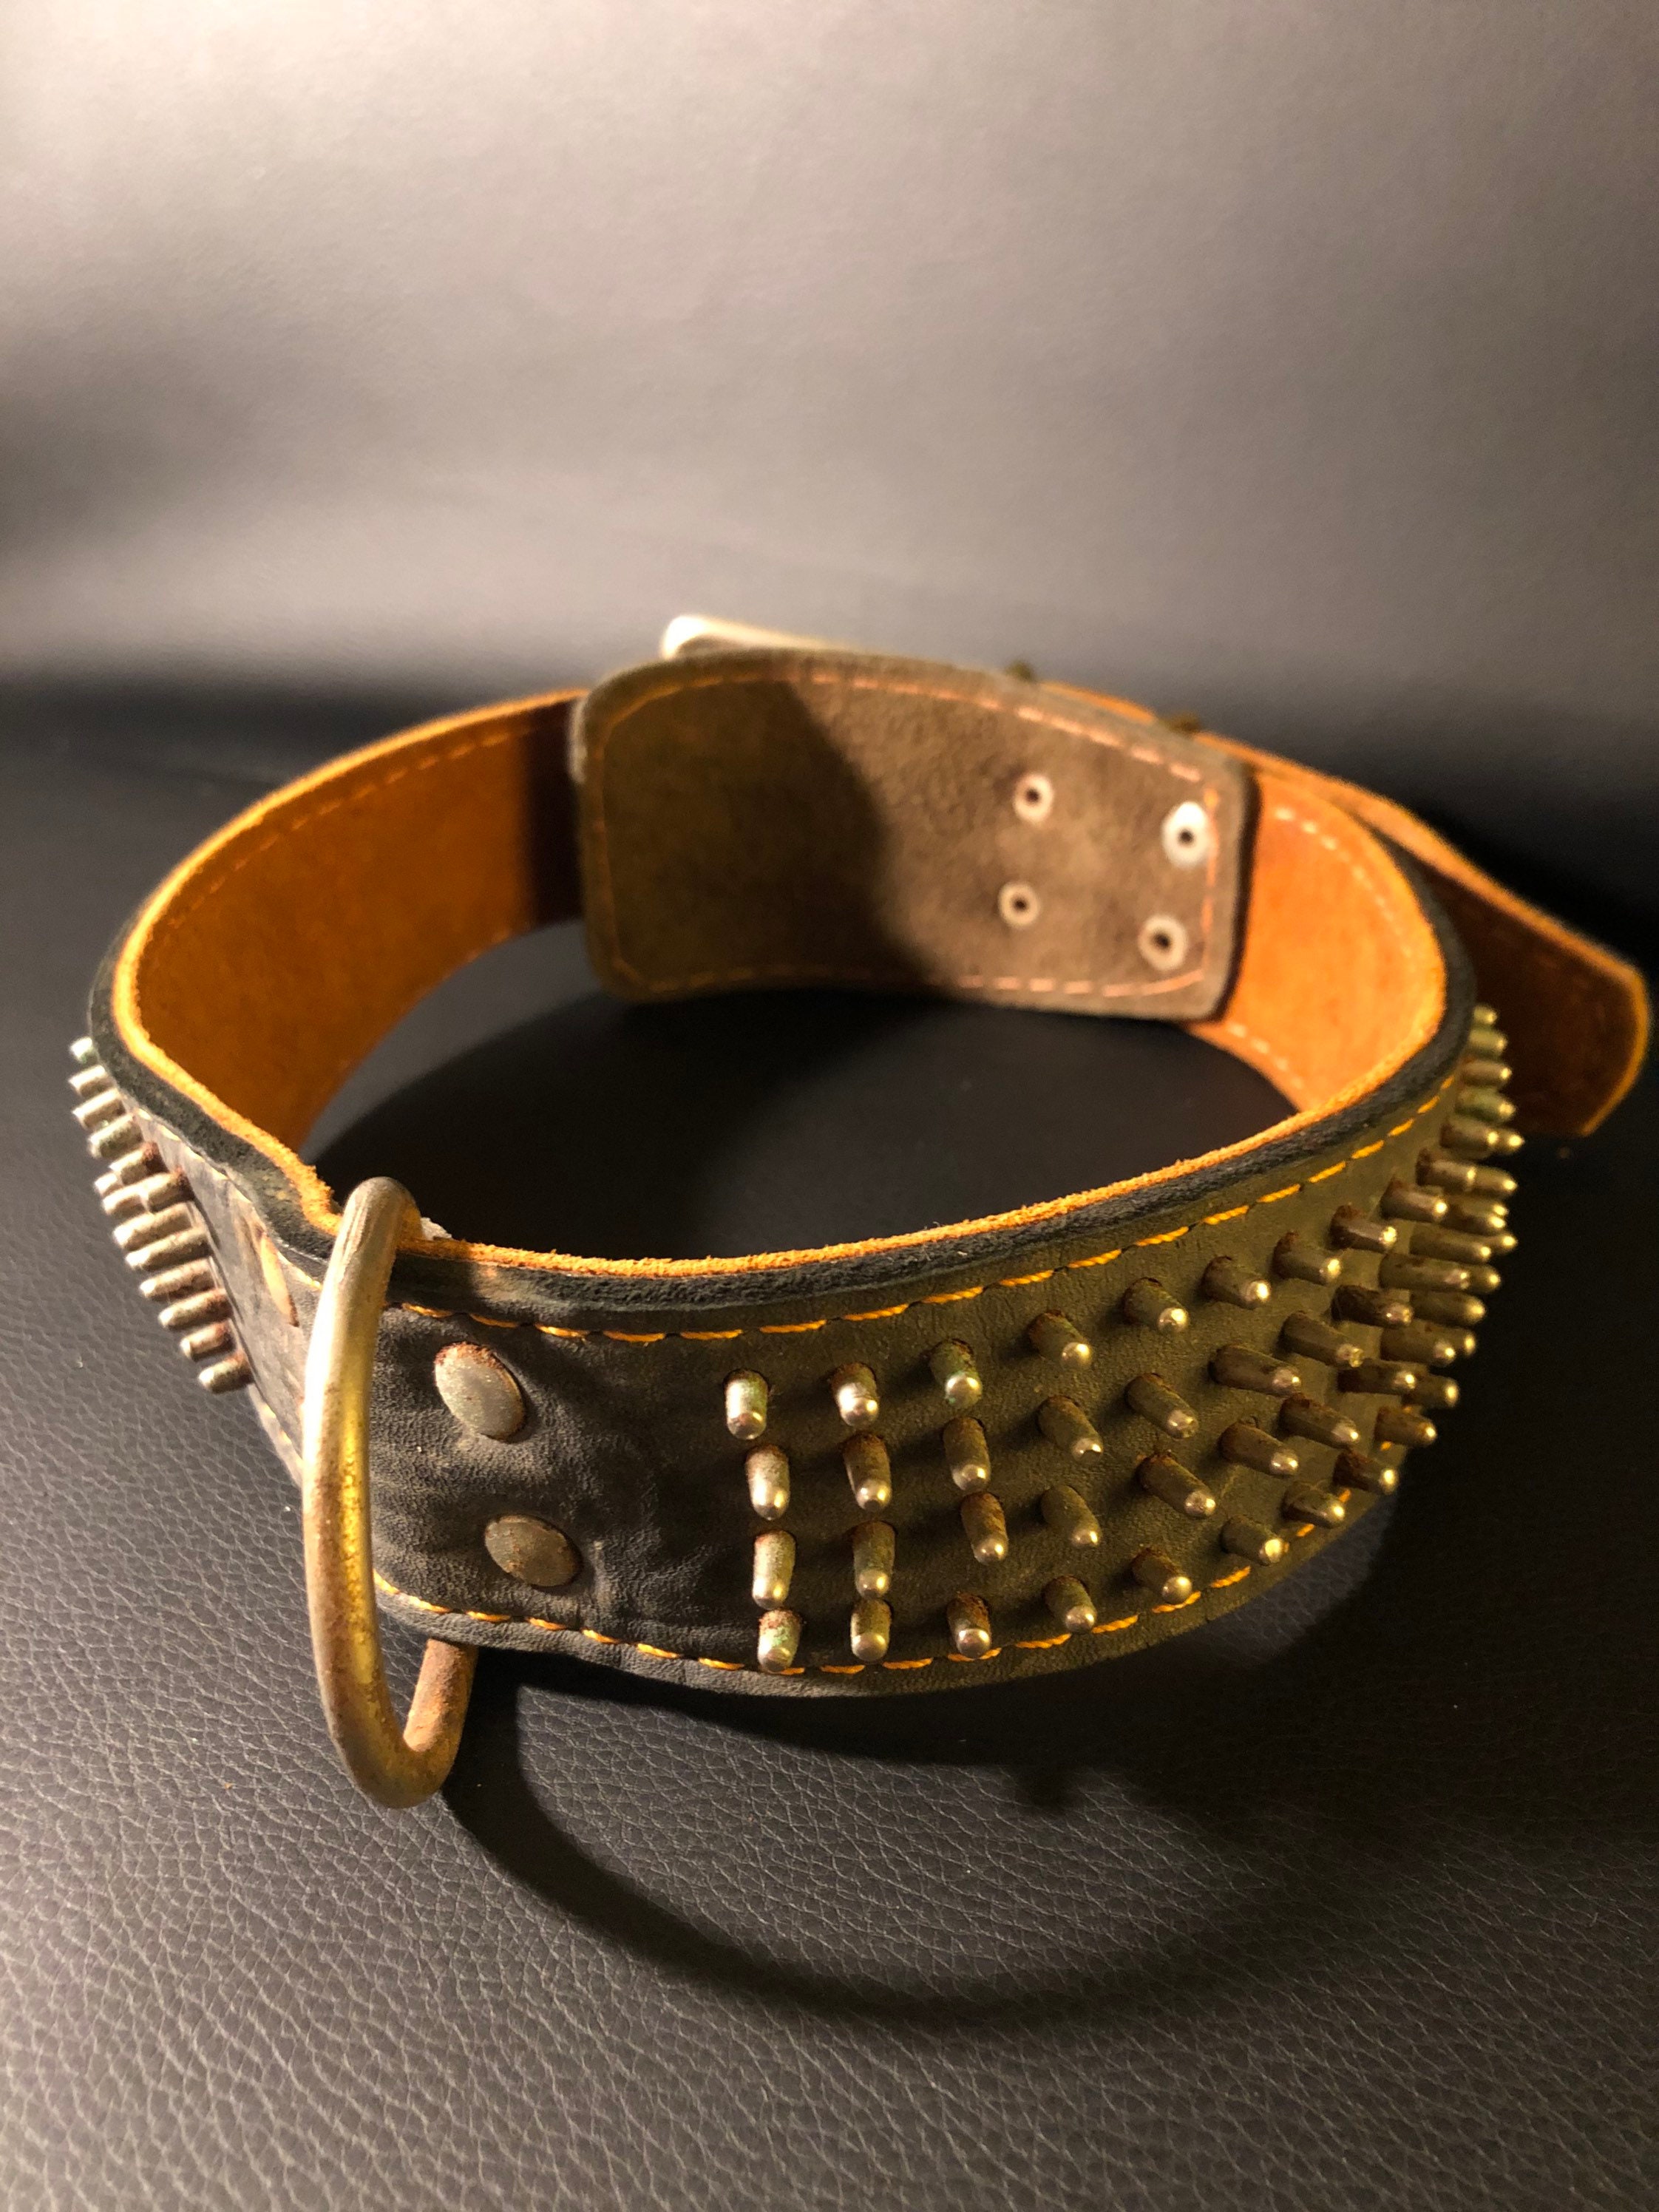 Classic Leather Cool Spiked Studded Adjustable Pet Collars For Large Dogs